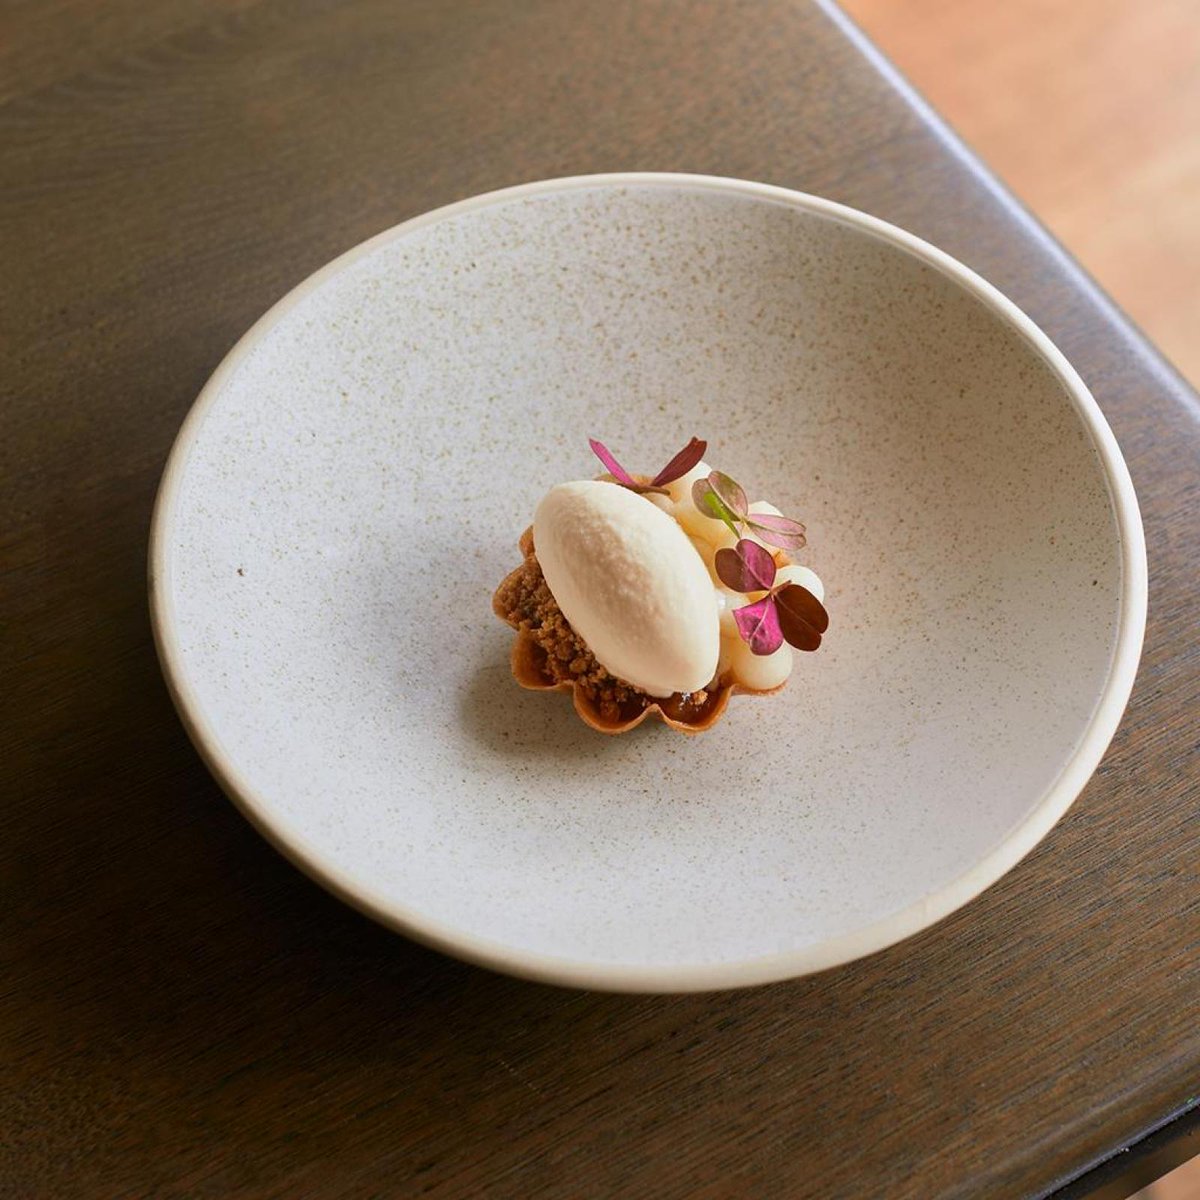 #Chiswick's newest 3 #AARosette hotspot, The Silver Birch, is a culinary star! With Head Chef @NathanCornwell1 at the helm, expect innovative, detailed dishes. Modern #Scandi vibes & top-notch service complete the experience. Take a look > tinyurl.com/4d5jkhkv